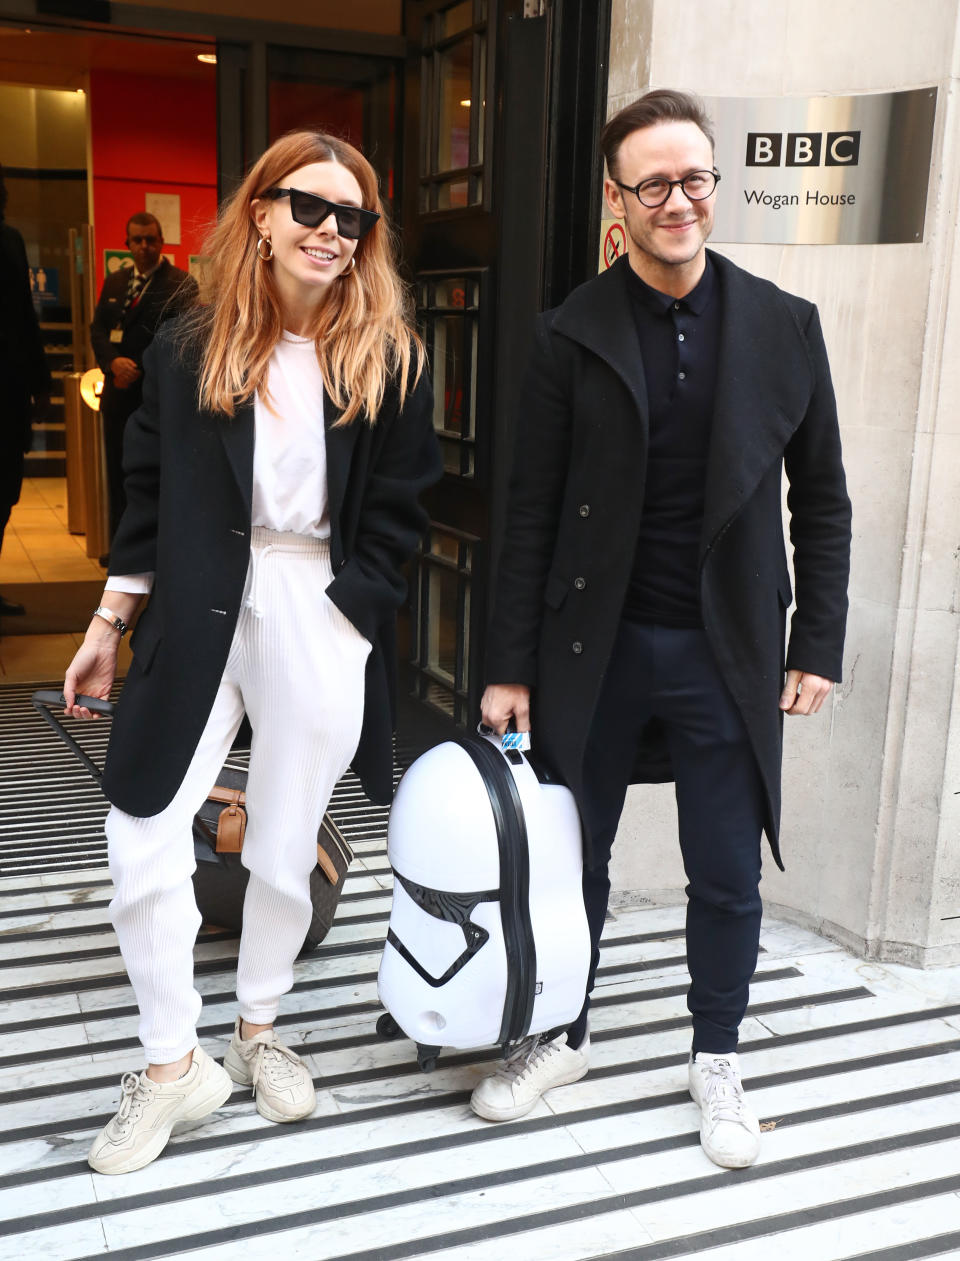 Strictly Come Dancing finalists Stacey Dooley and Kevin Clifton leave BBC Broadcasting House in London after appearing on the Chris Evans radio show.